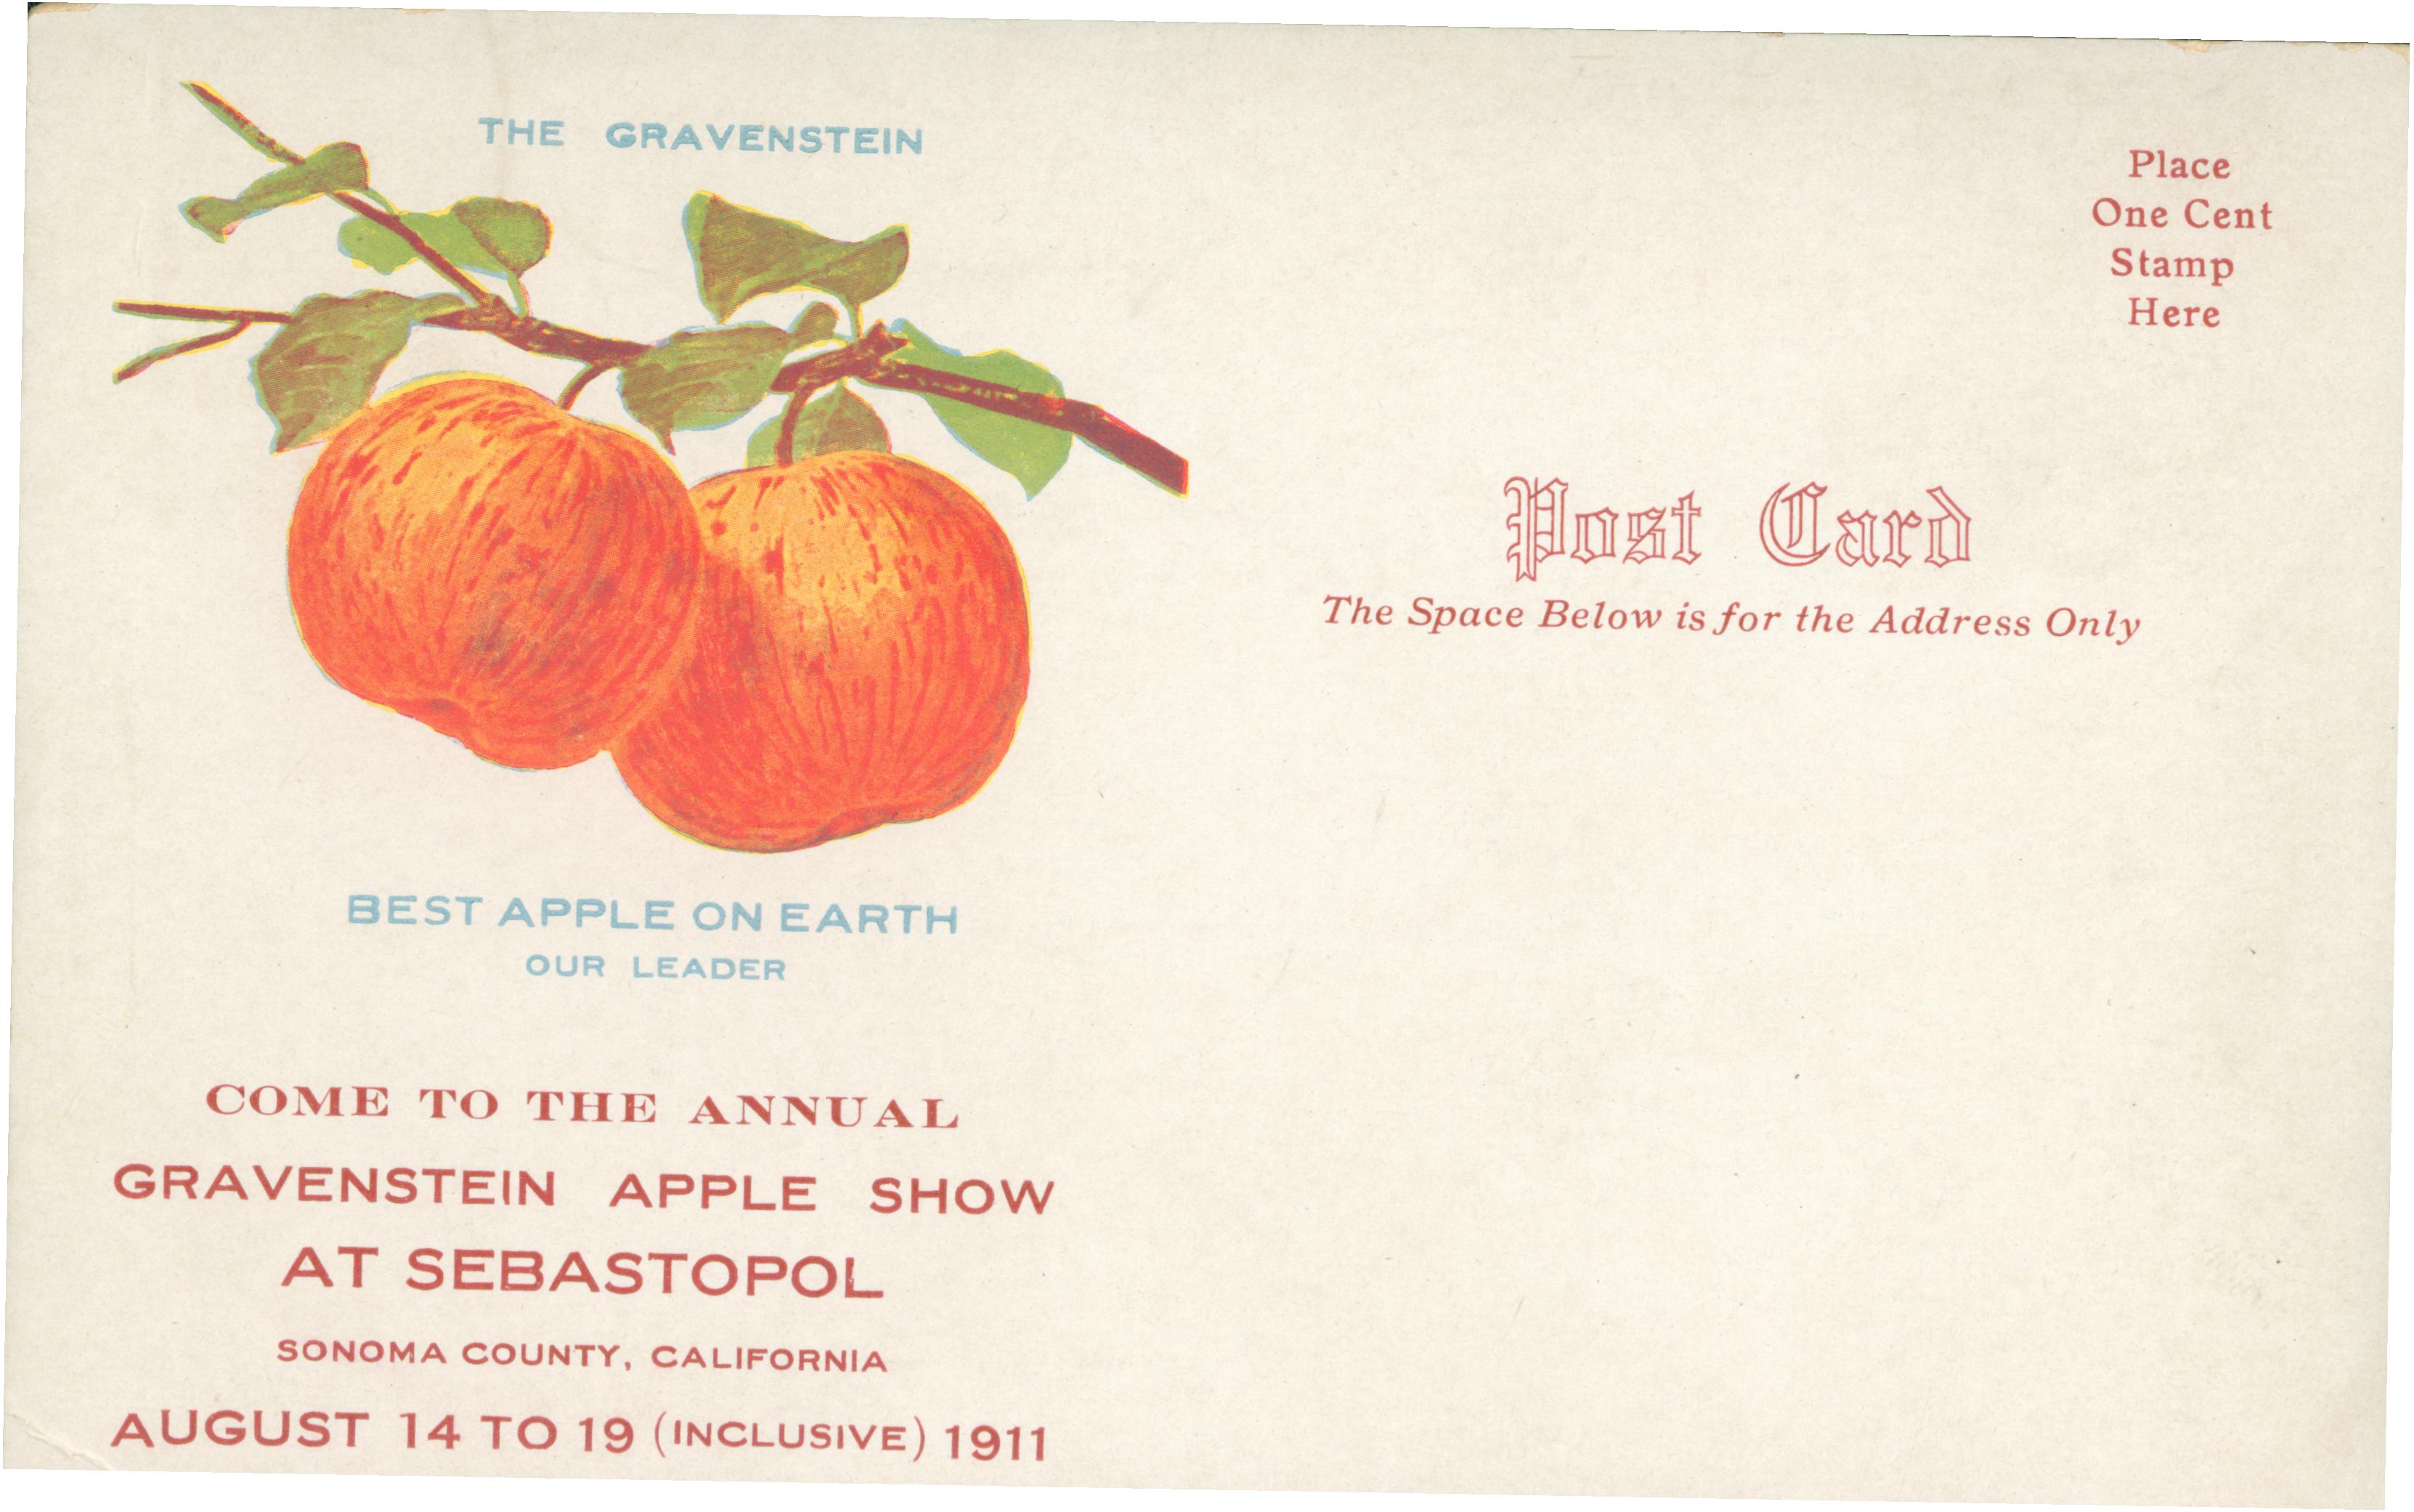 Shows a picture of two apples hanging from a tree branch to the left of the address area